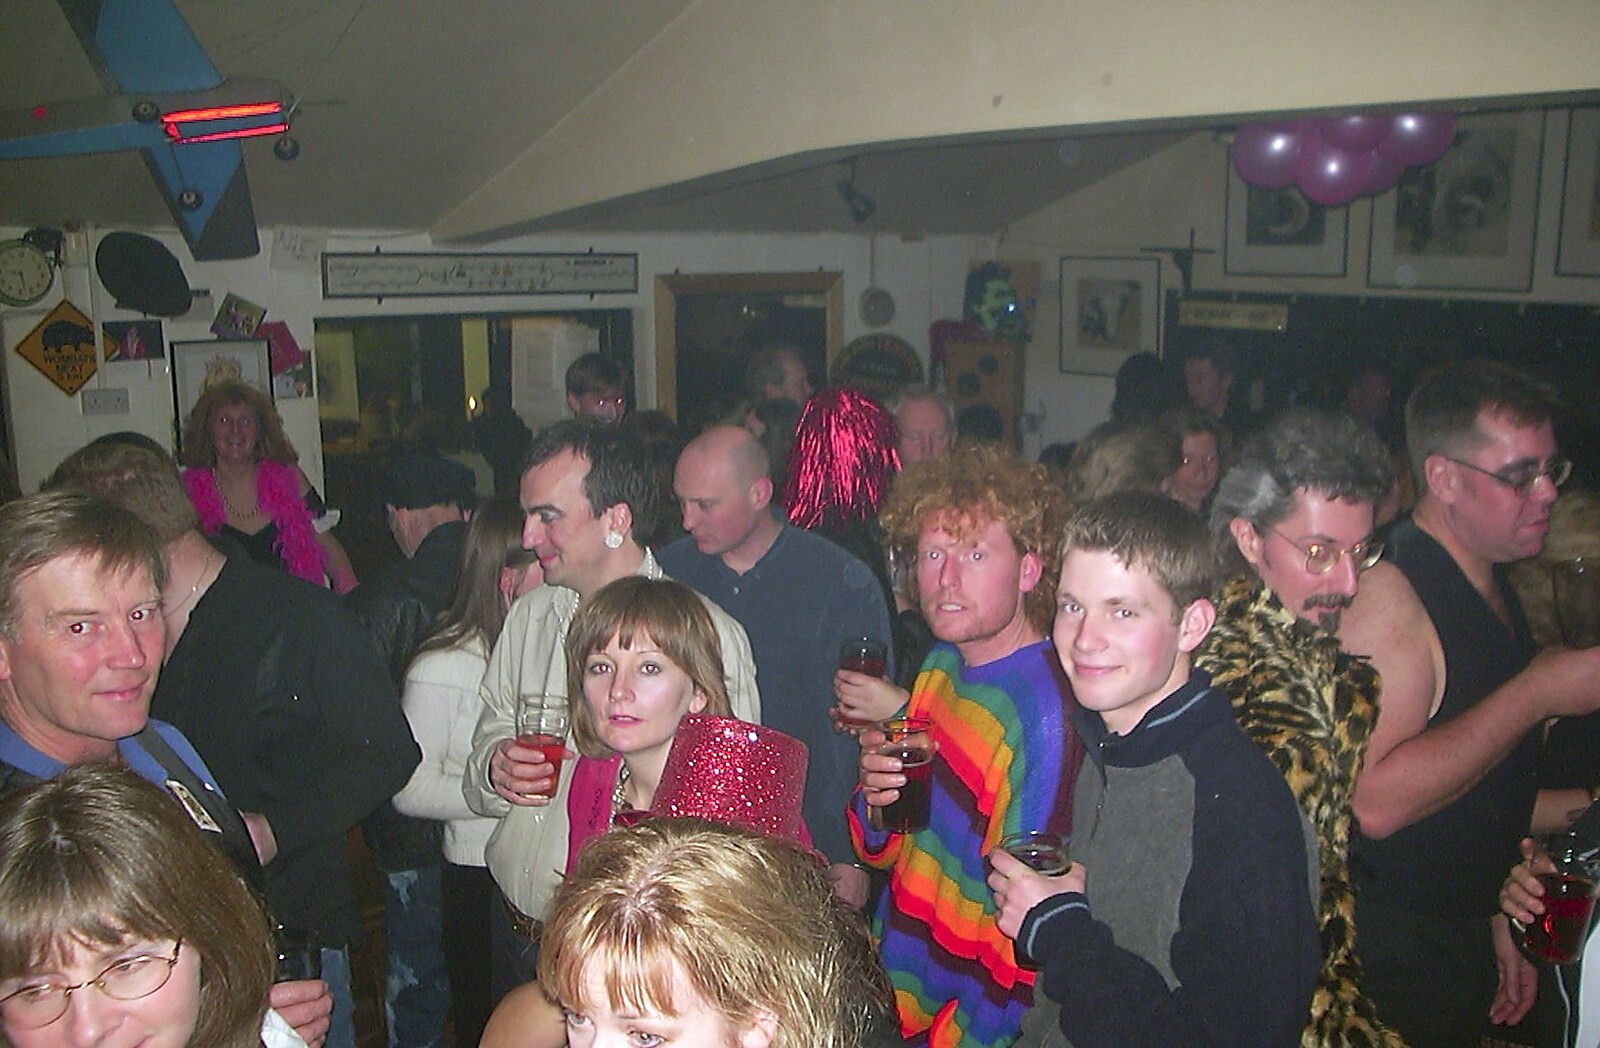 Wavy and The Boy Phil mingle in the crowd from The BBs do New Year's Eve at The Cider Shed, Banham, Norfolk - 31st December 2003